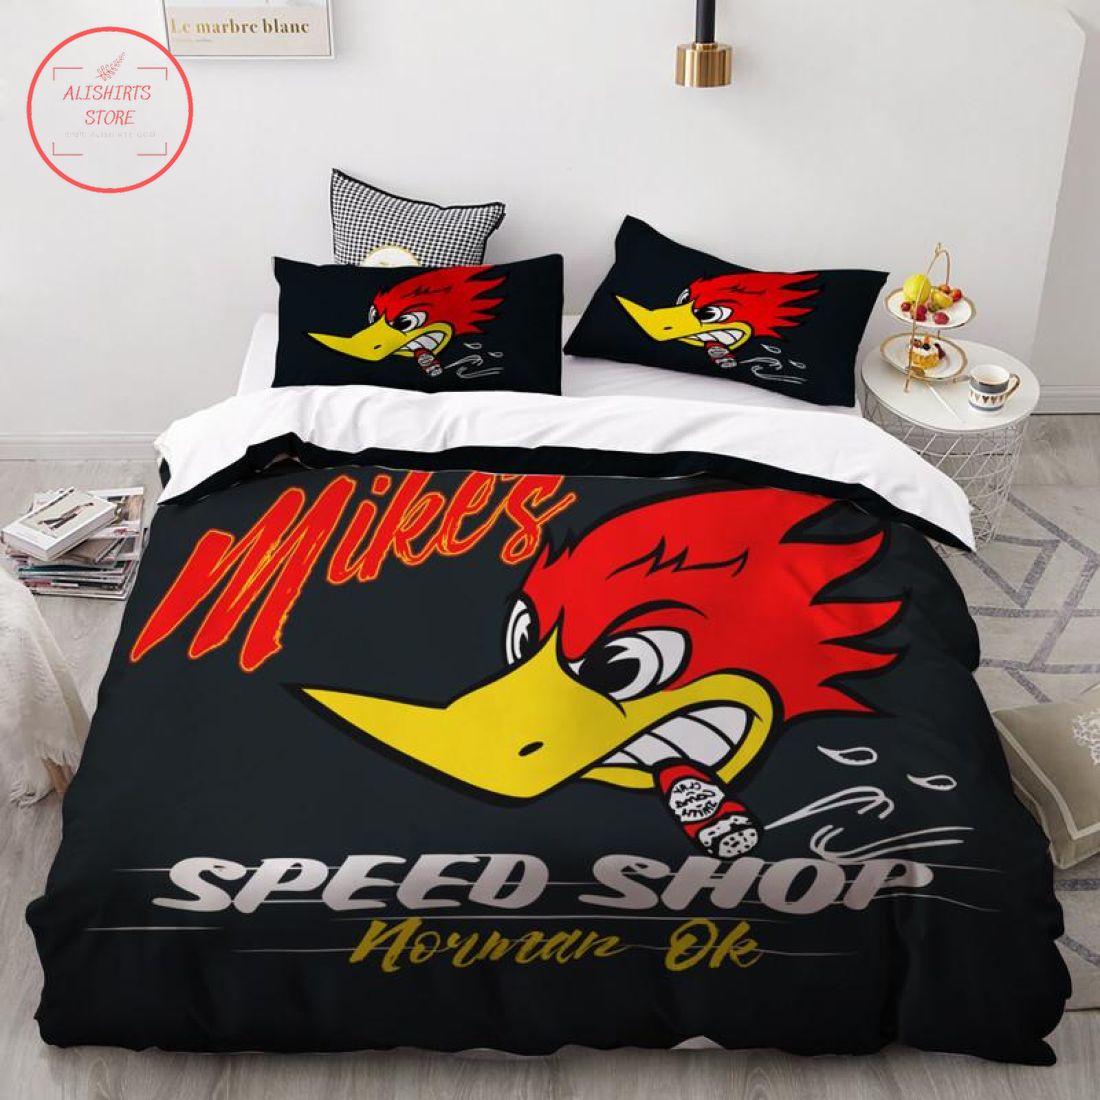 Personalized Speed Shop Hot Rod Bedding Set